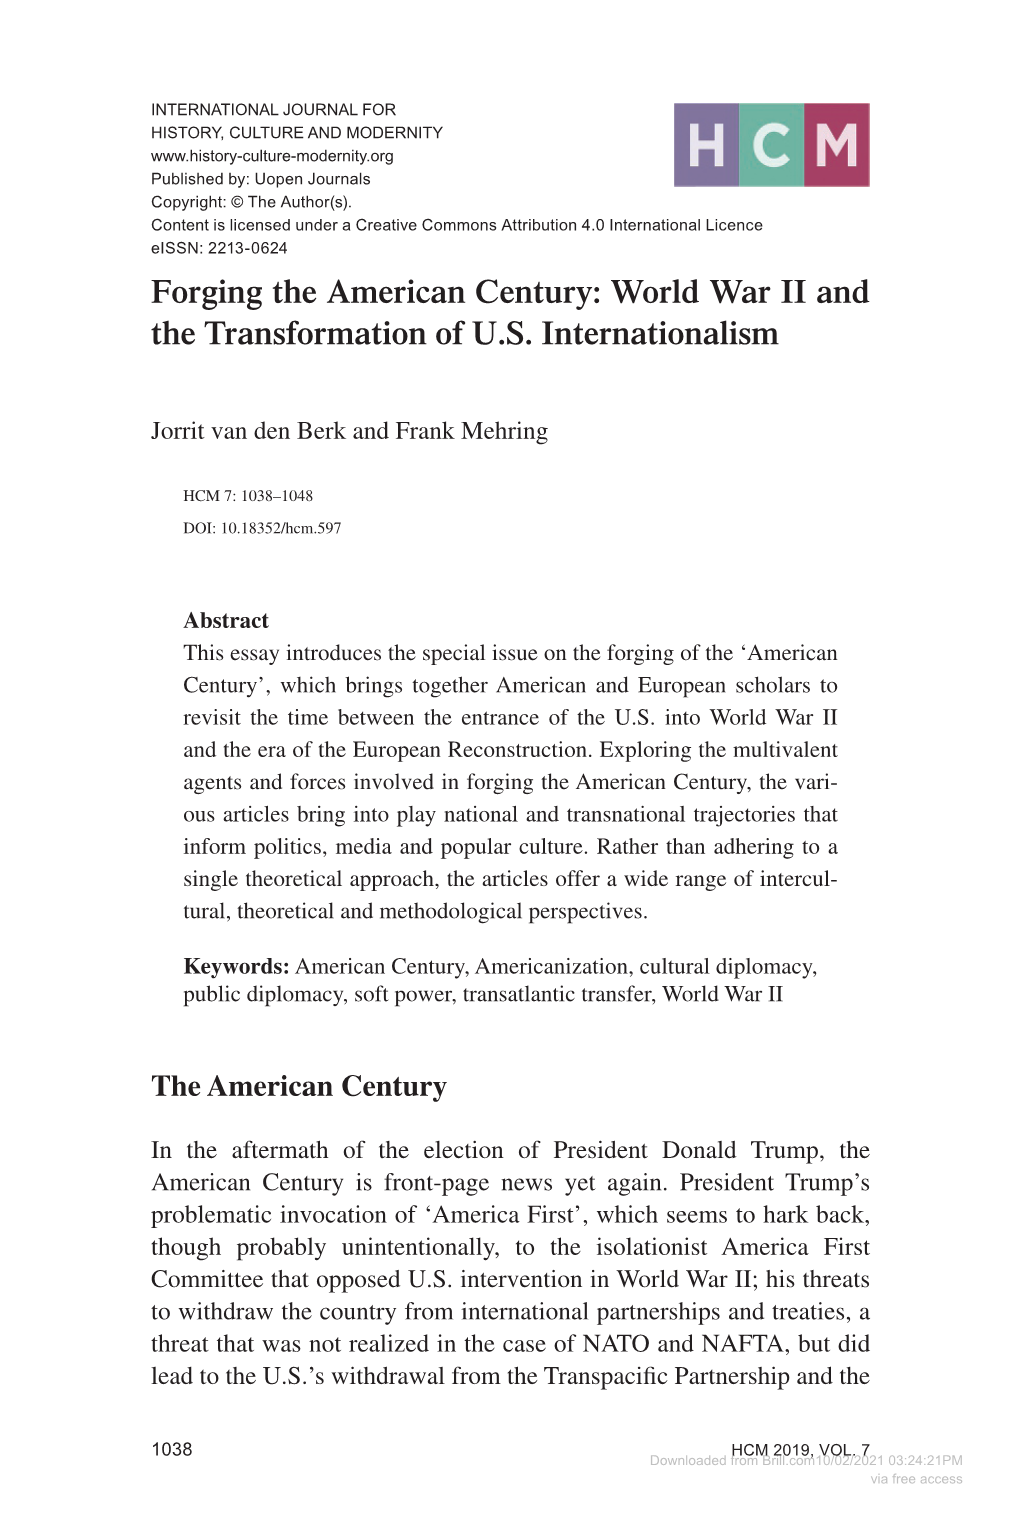 Forging the American Century: World War II and the Transformation of U.S